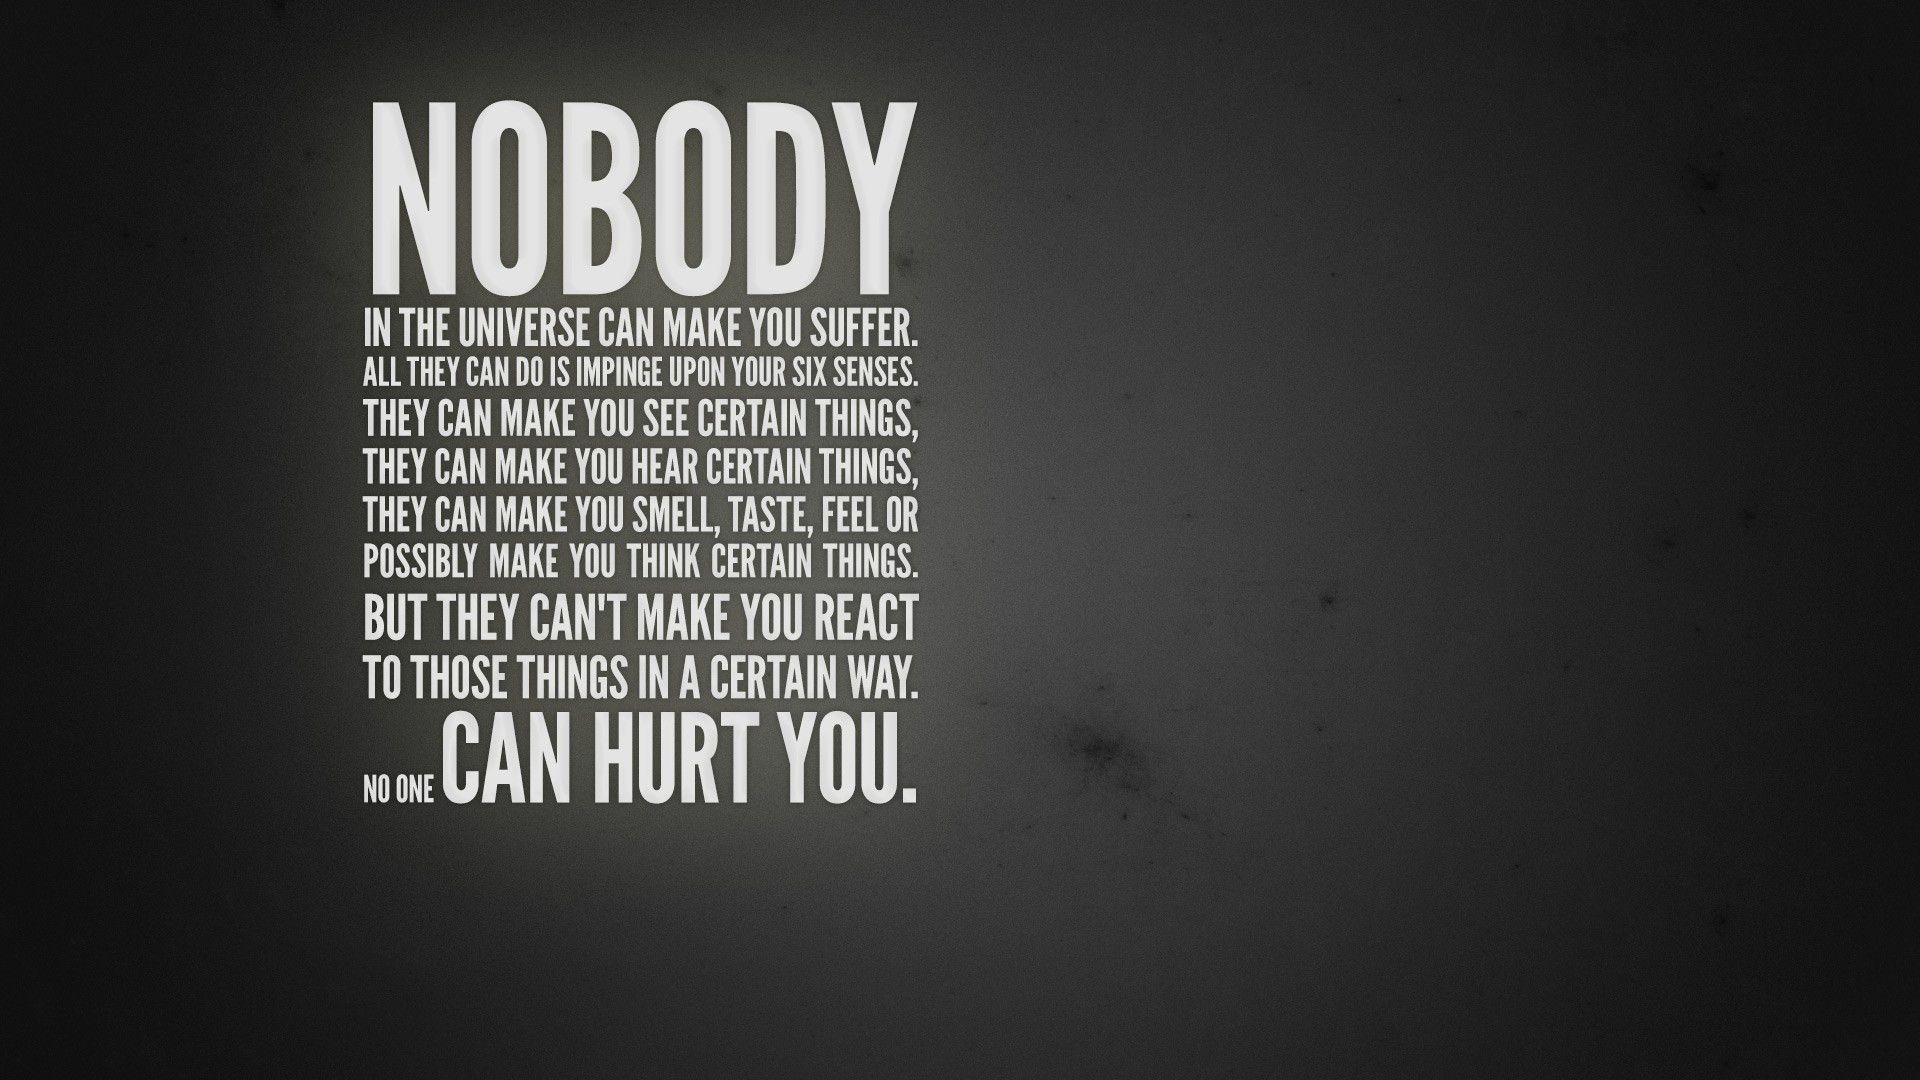 No Body Can Hurt You large HD resolution wallpaper